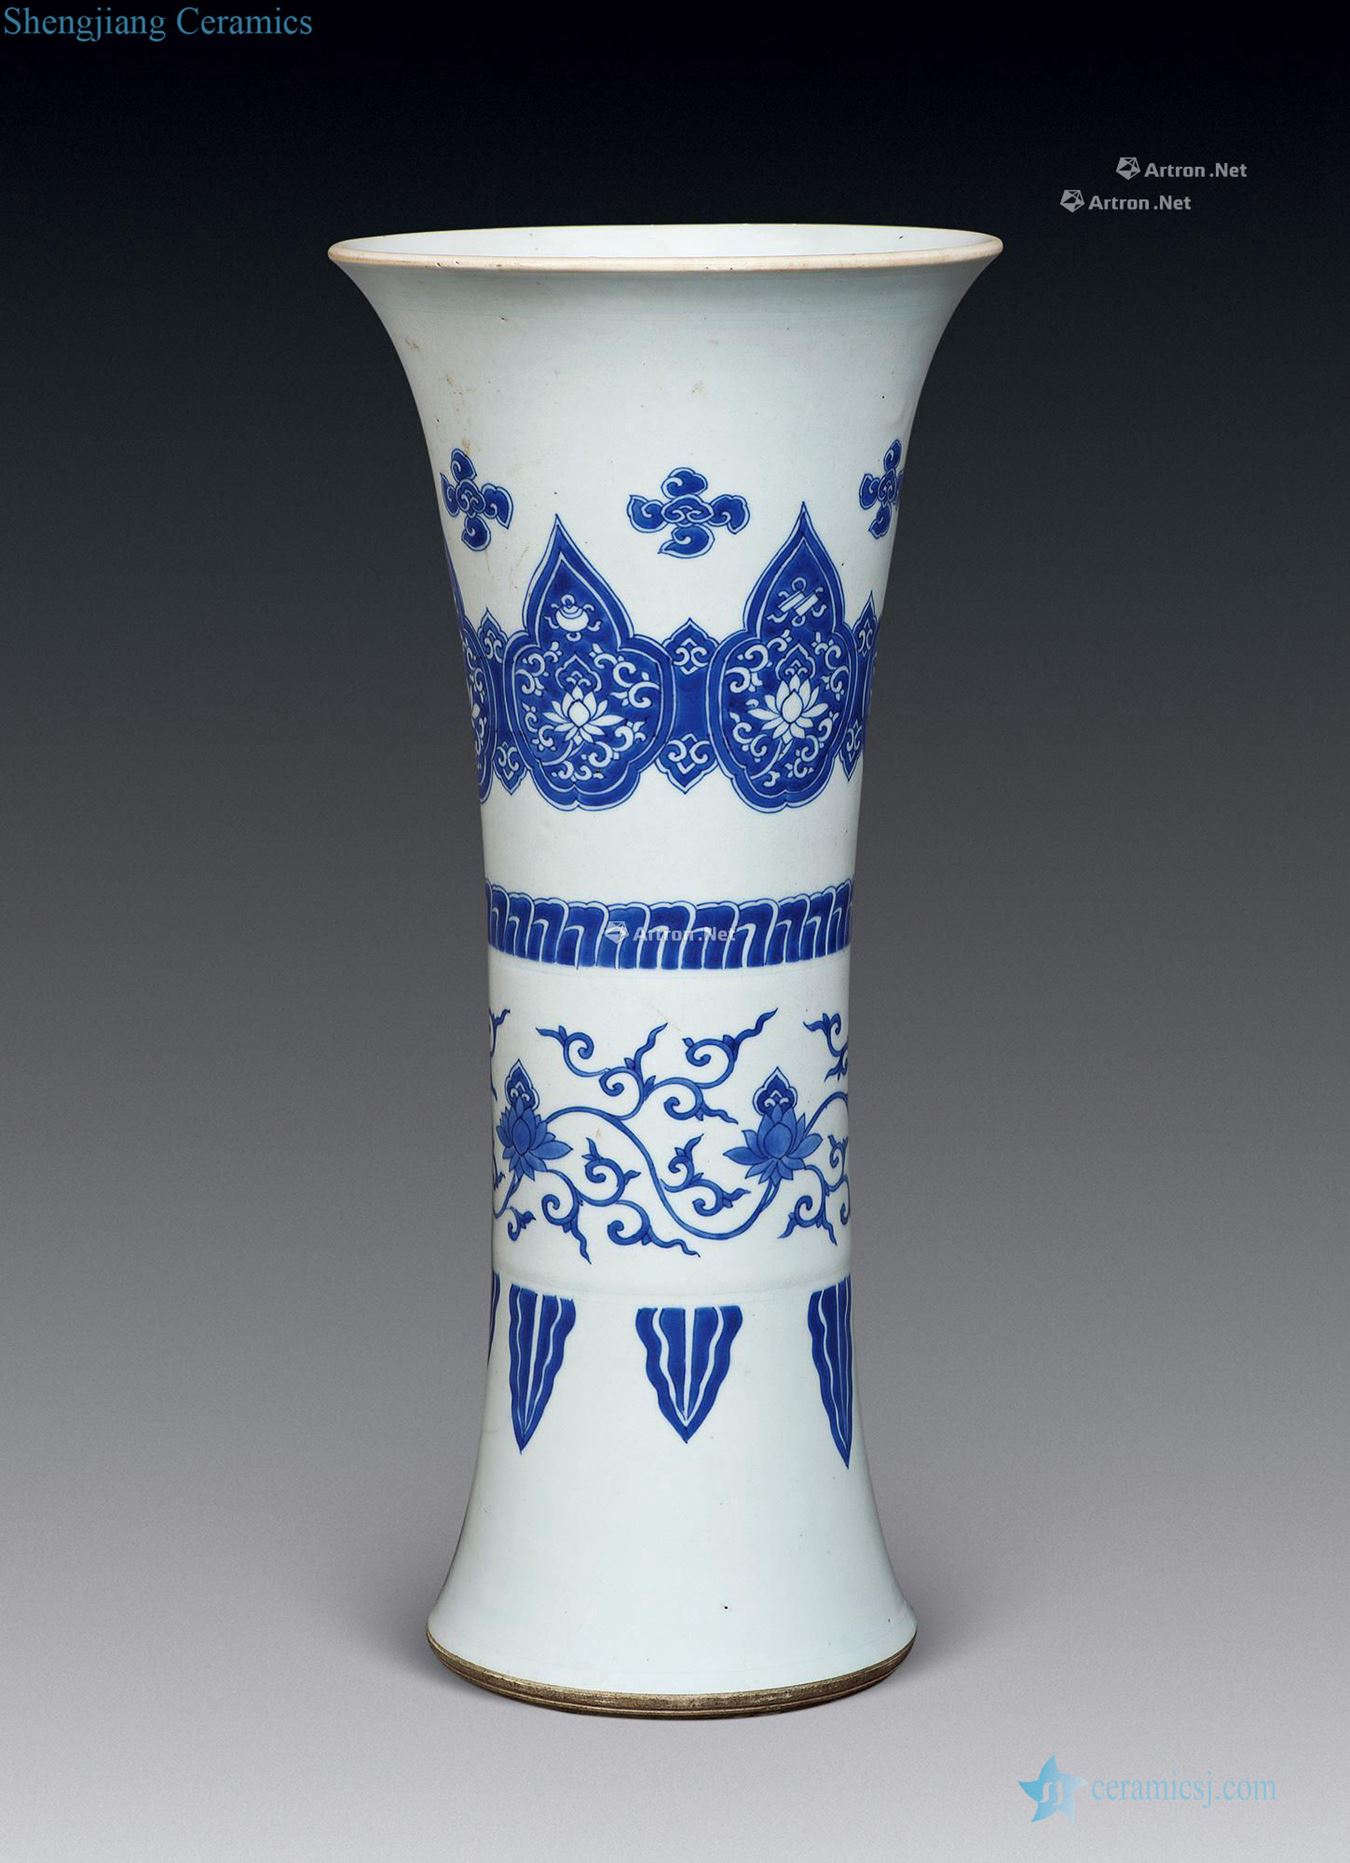 In the qing dynasty blue and white vase with flowers